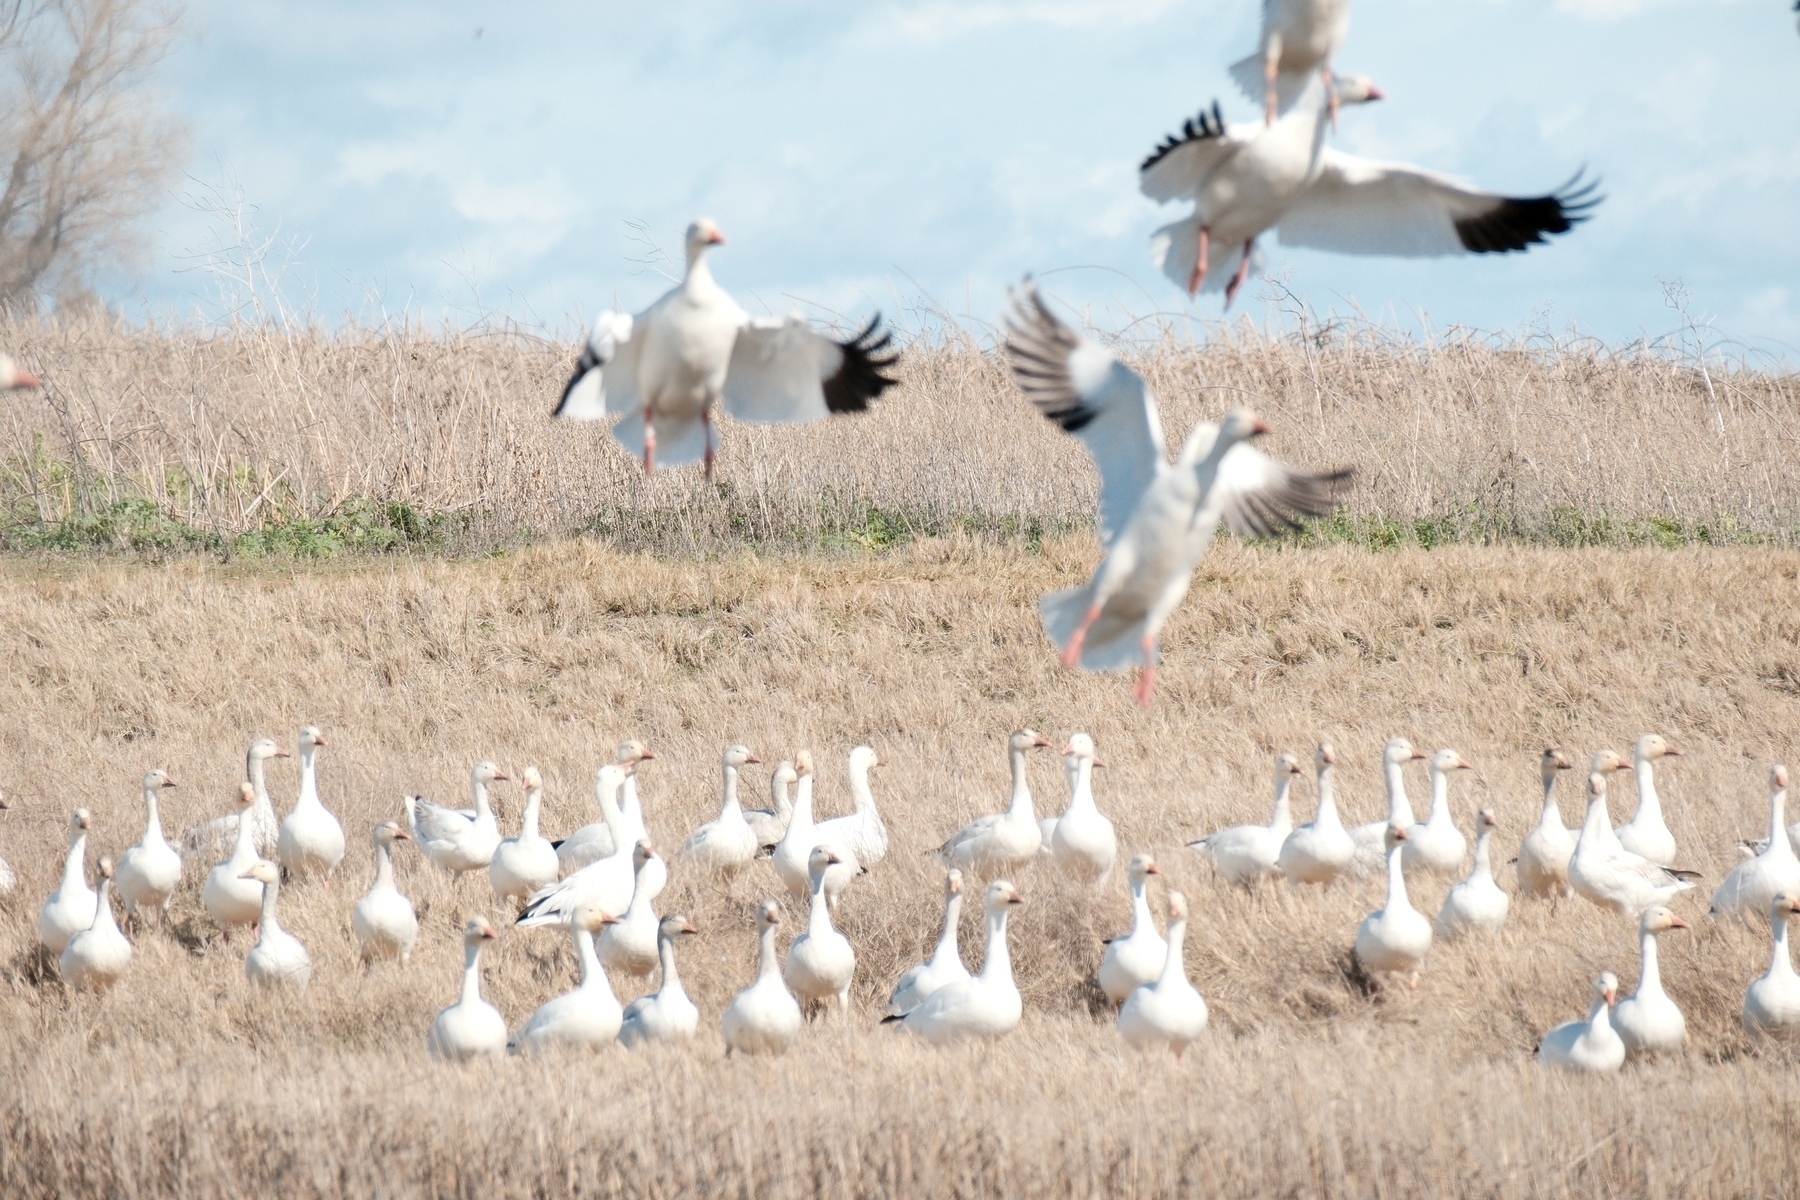 Snow geese, white with black wing tips, take flight in the foreground while a linear group look on in the background. They're in an area with some tall grass and the sky is blue gray.